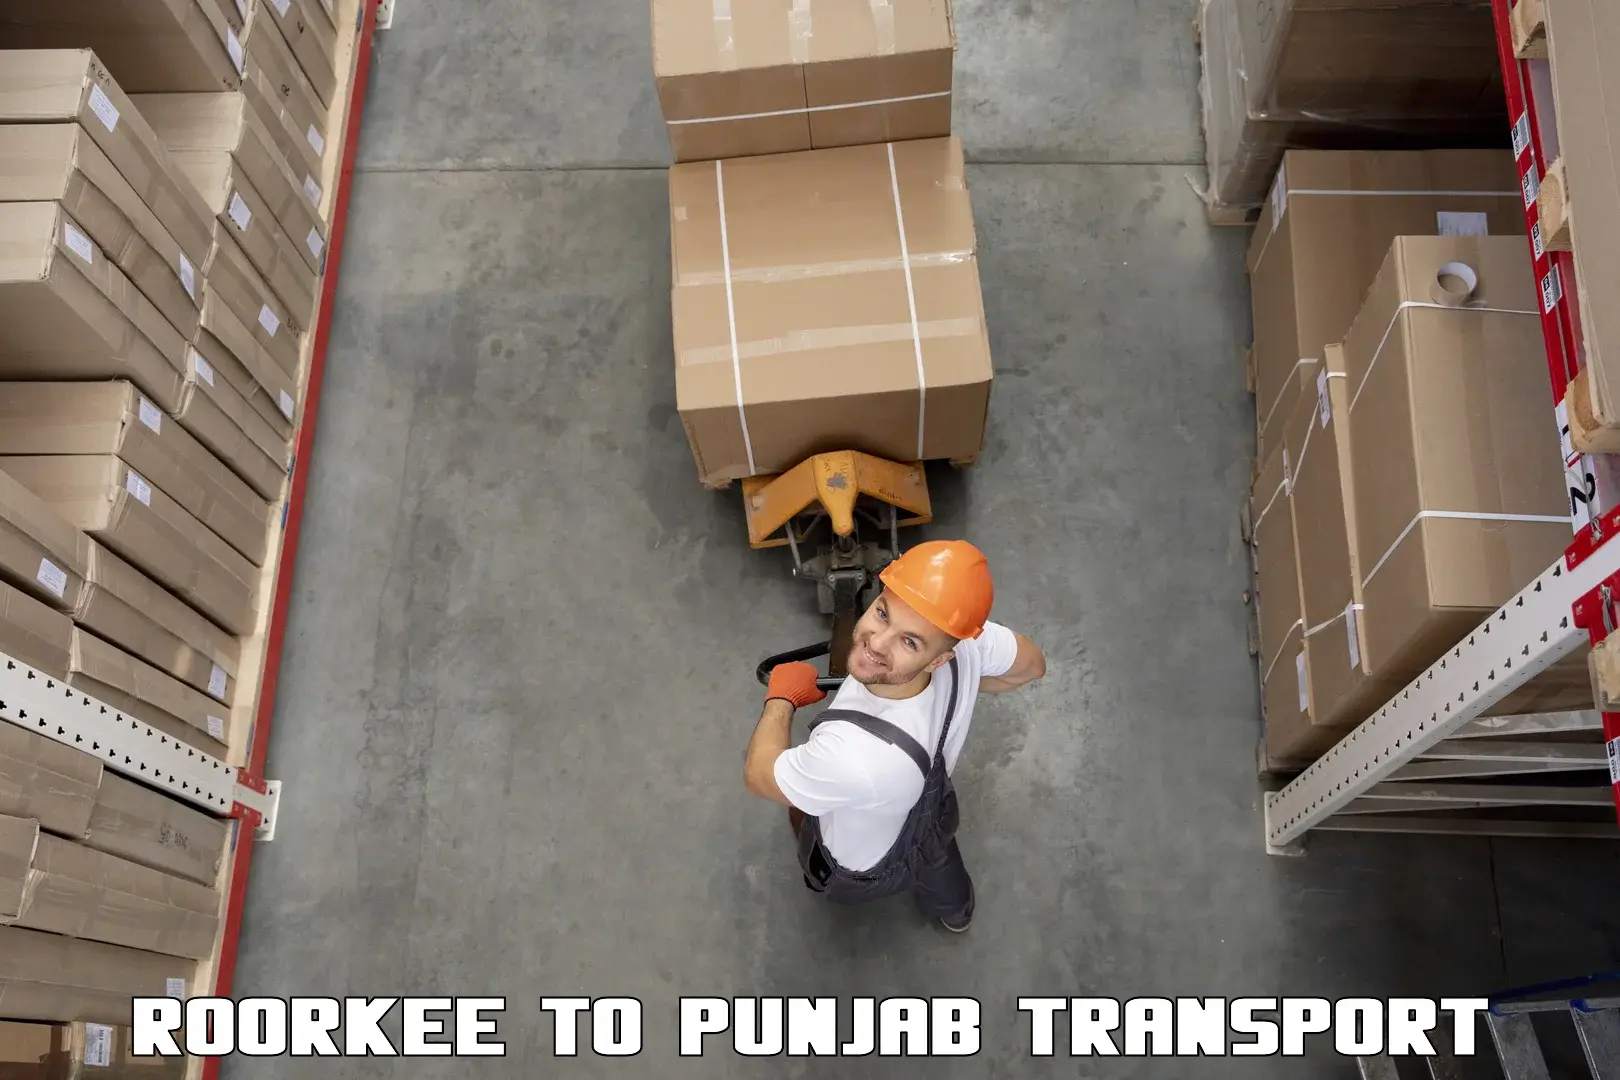 Delivery service Roorkee to Amritsar